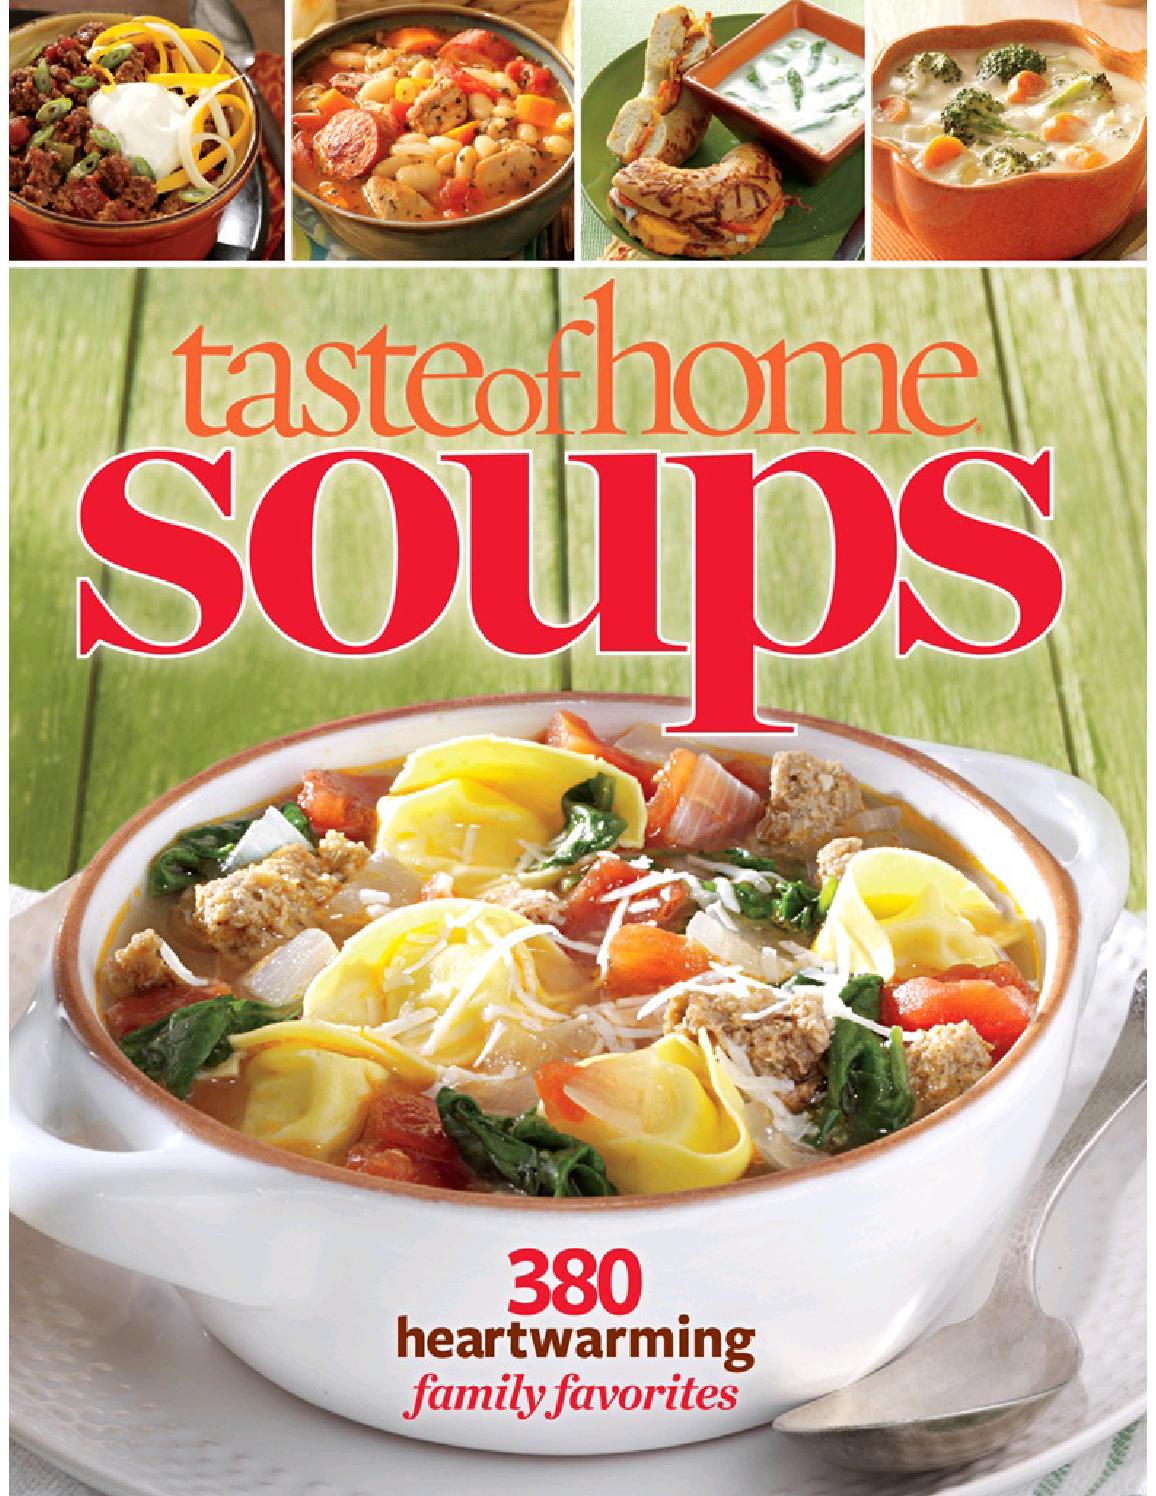 Taste of home soups by Anna25